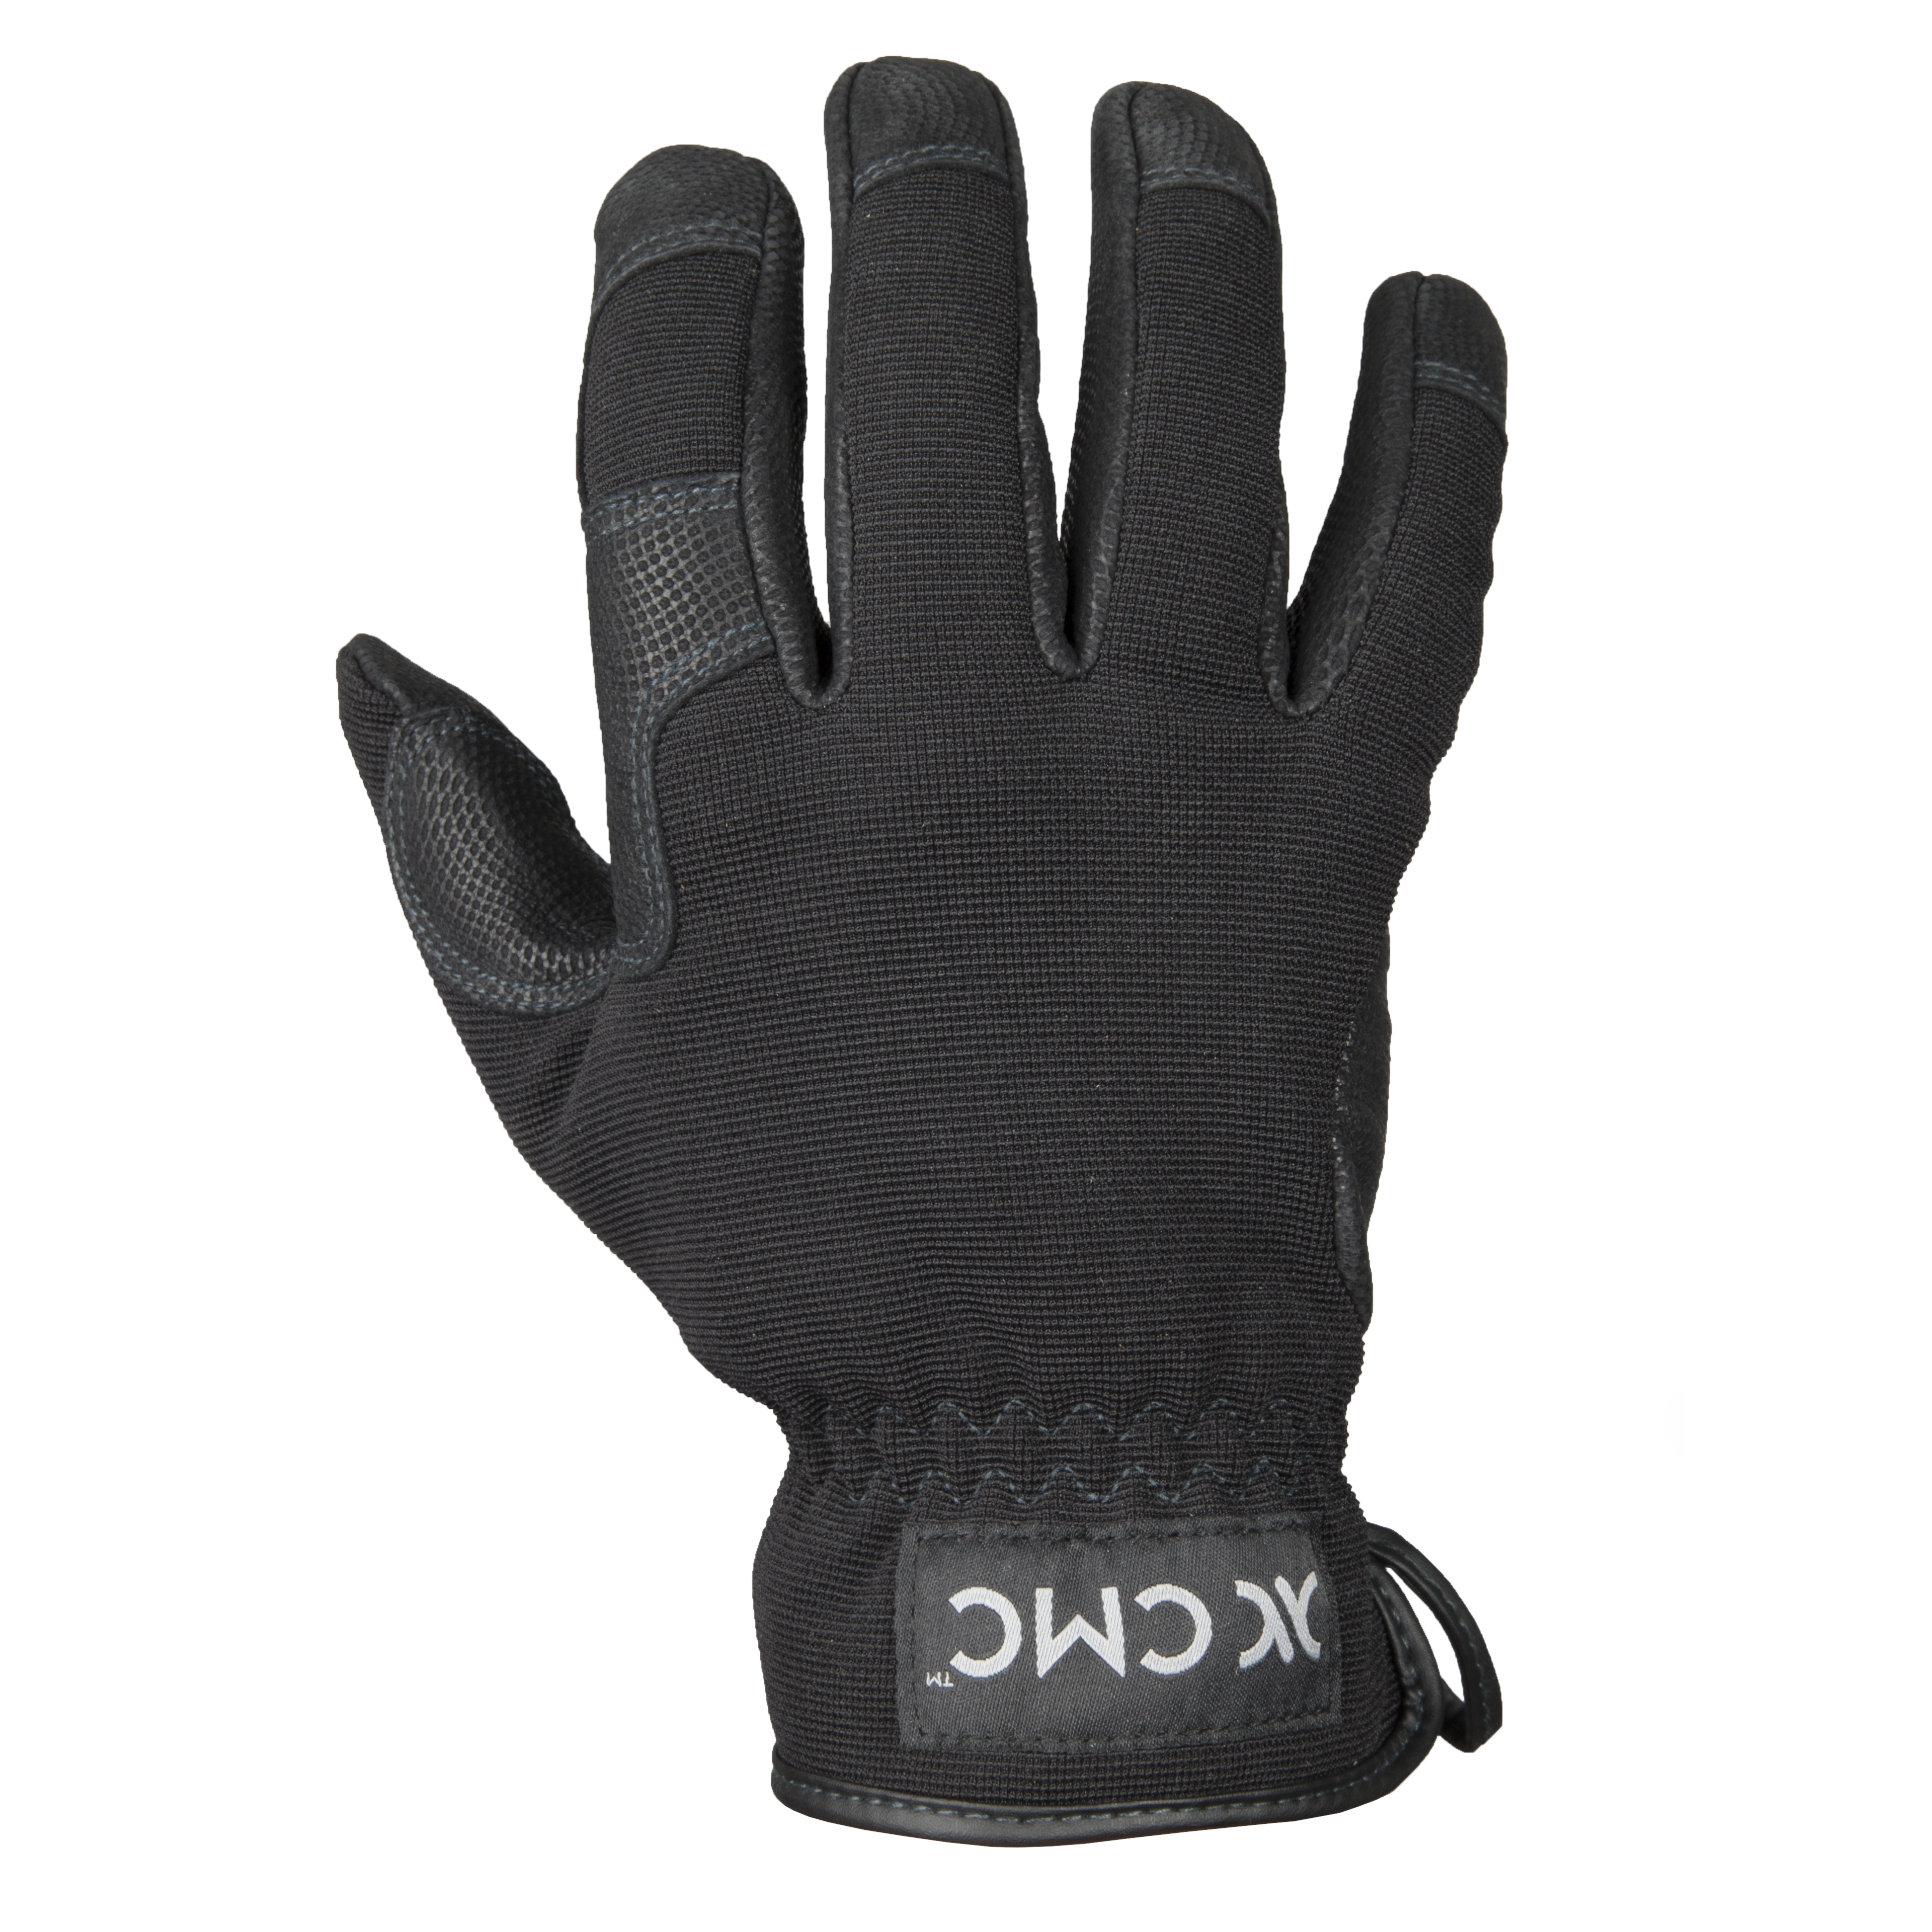 https://cdn.shopify.com/s/files/1/0077/4638/8058/products/25025X_Riggers_Gloves_01.png?v=1571775572&width=5760